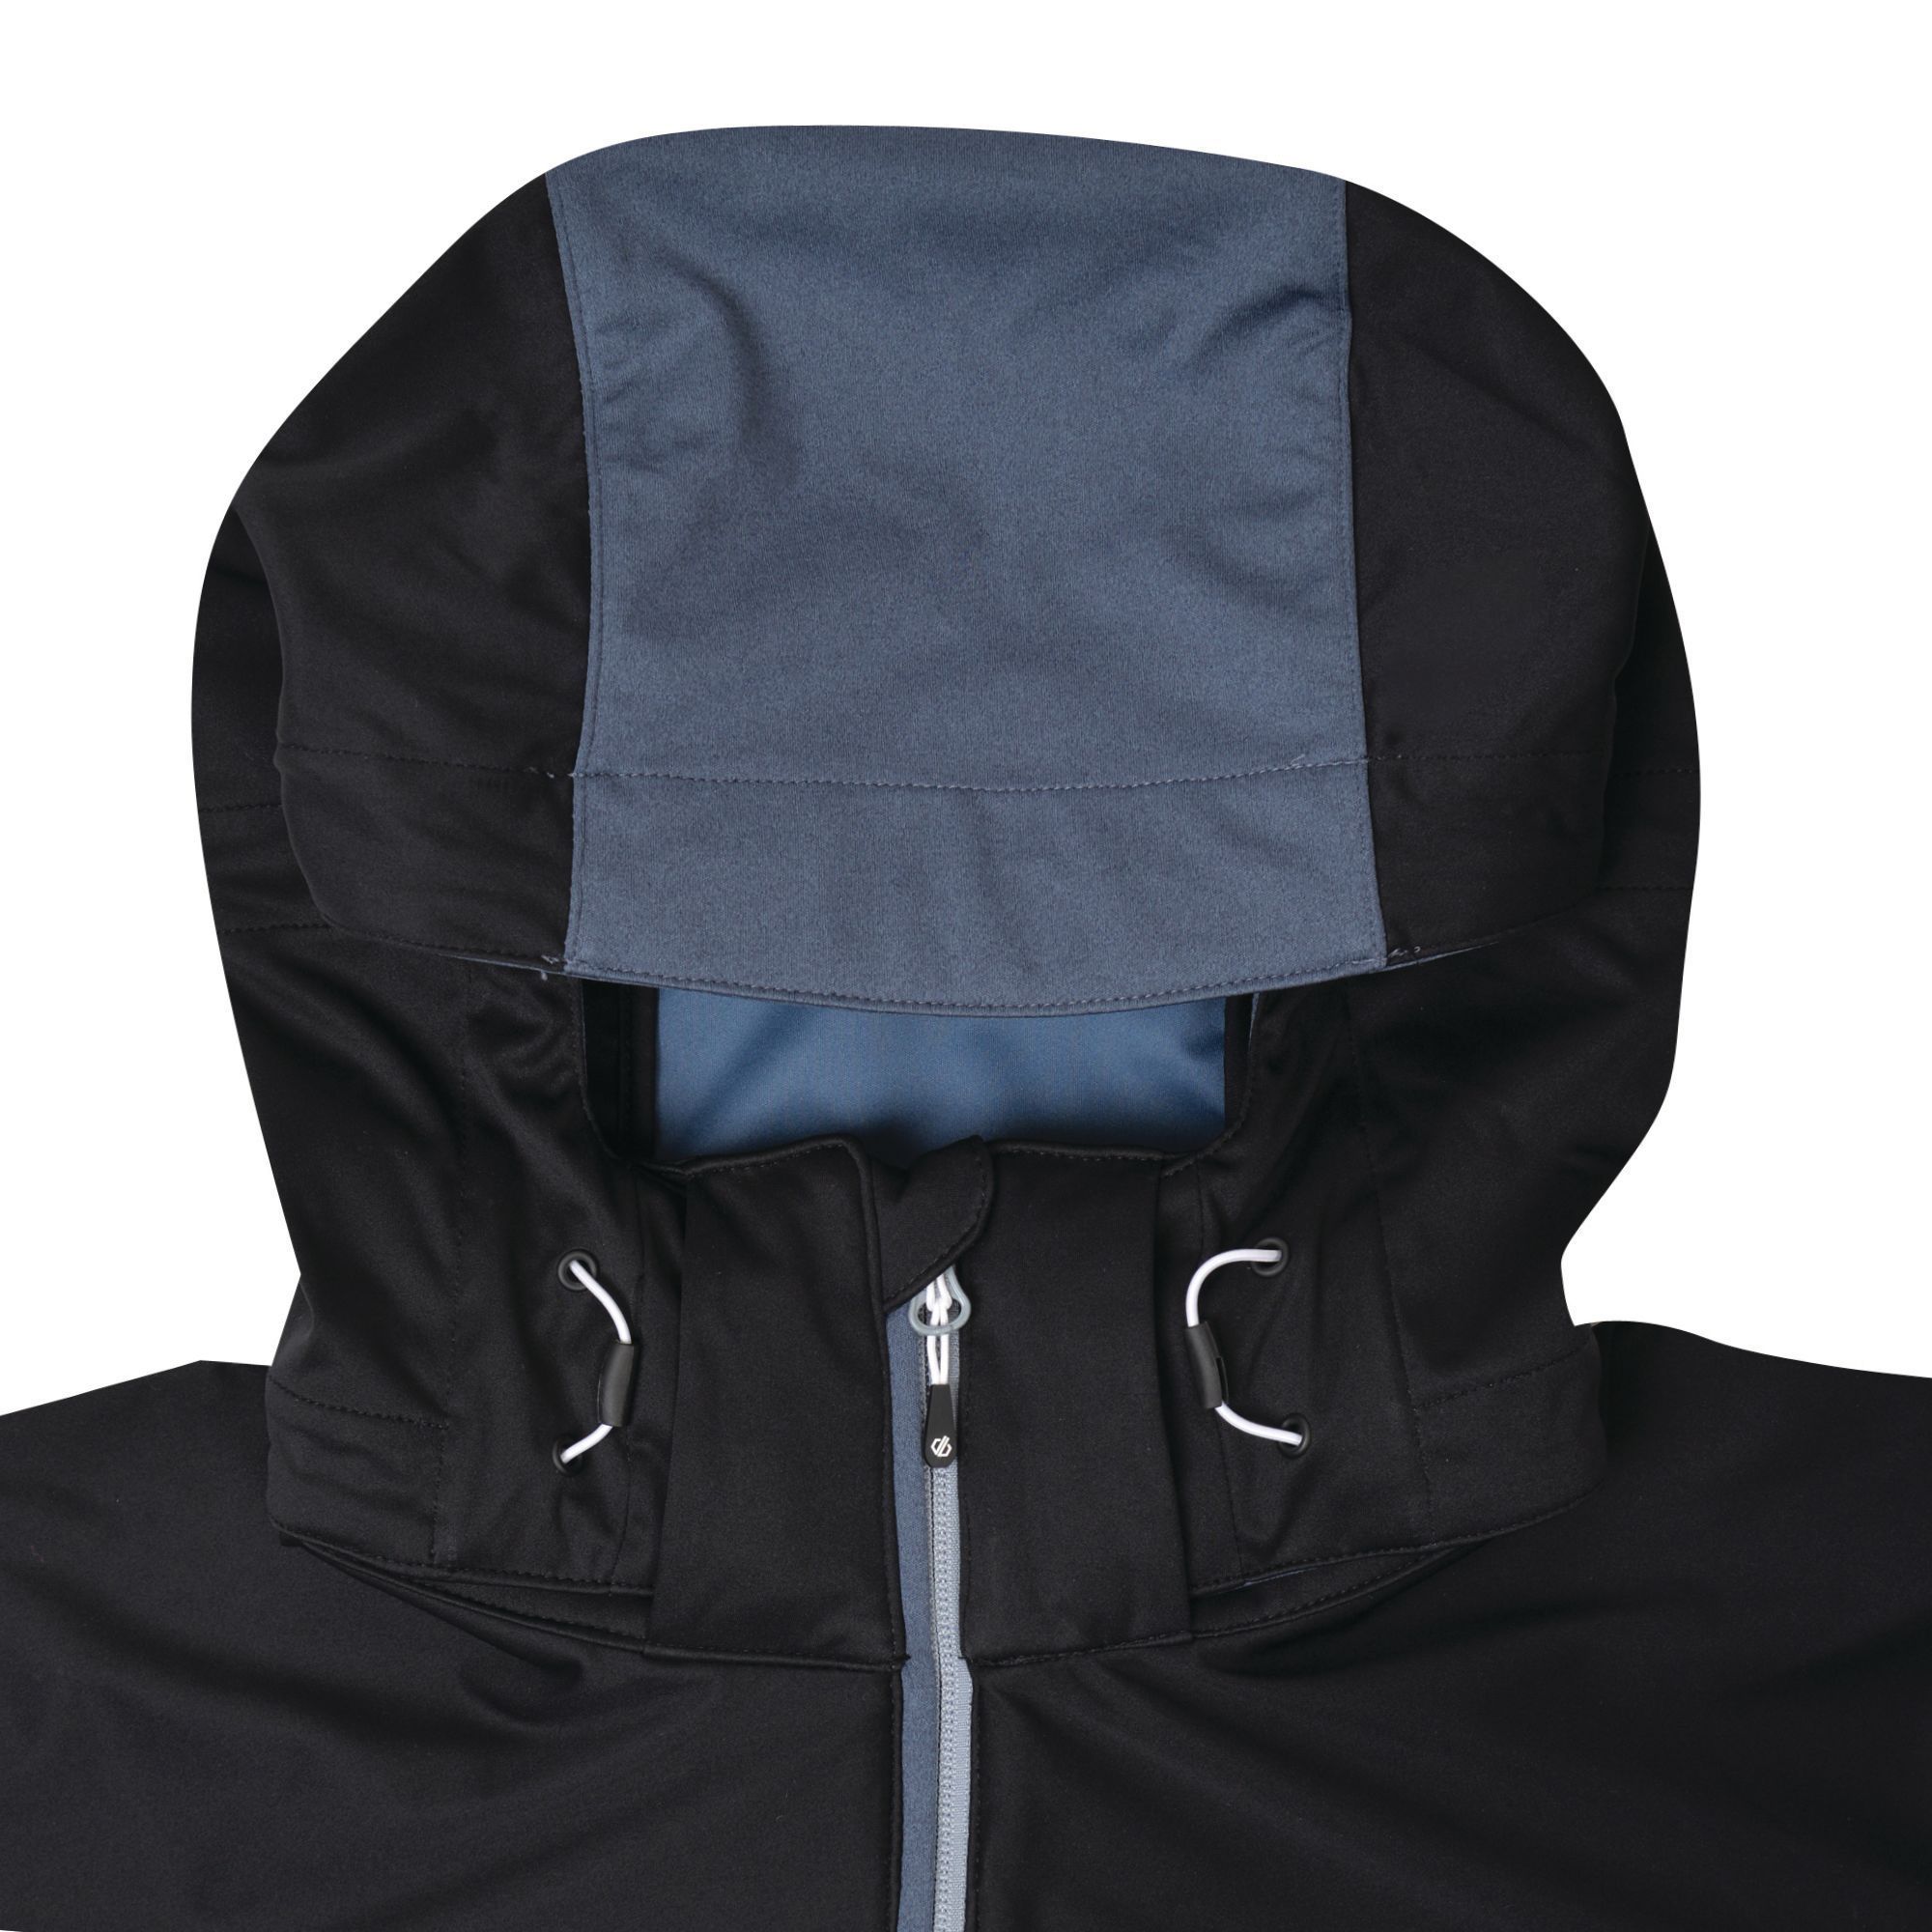 100% polyester. Ilus D-Lab woven stretch polyester softshell fabric. AEP Kinematics. SeamSmart Technology. Waterproof up to 5,000mm/ Breathability rating 5,000/m2/24hrs. Detachable performance fit technical hood with adjusters. Underarm ventilation zips. Articulated sleeves for enhanced range of movement. Stretch binding to cuffs and hem. 1 x zipped chest pocket and 2 x zipped lower pockets. Headphone port to inner pocket bag.